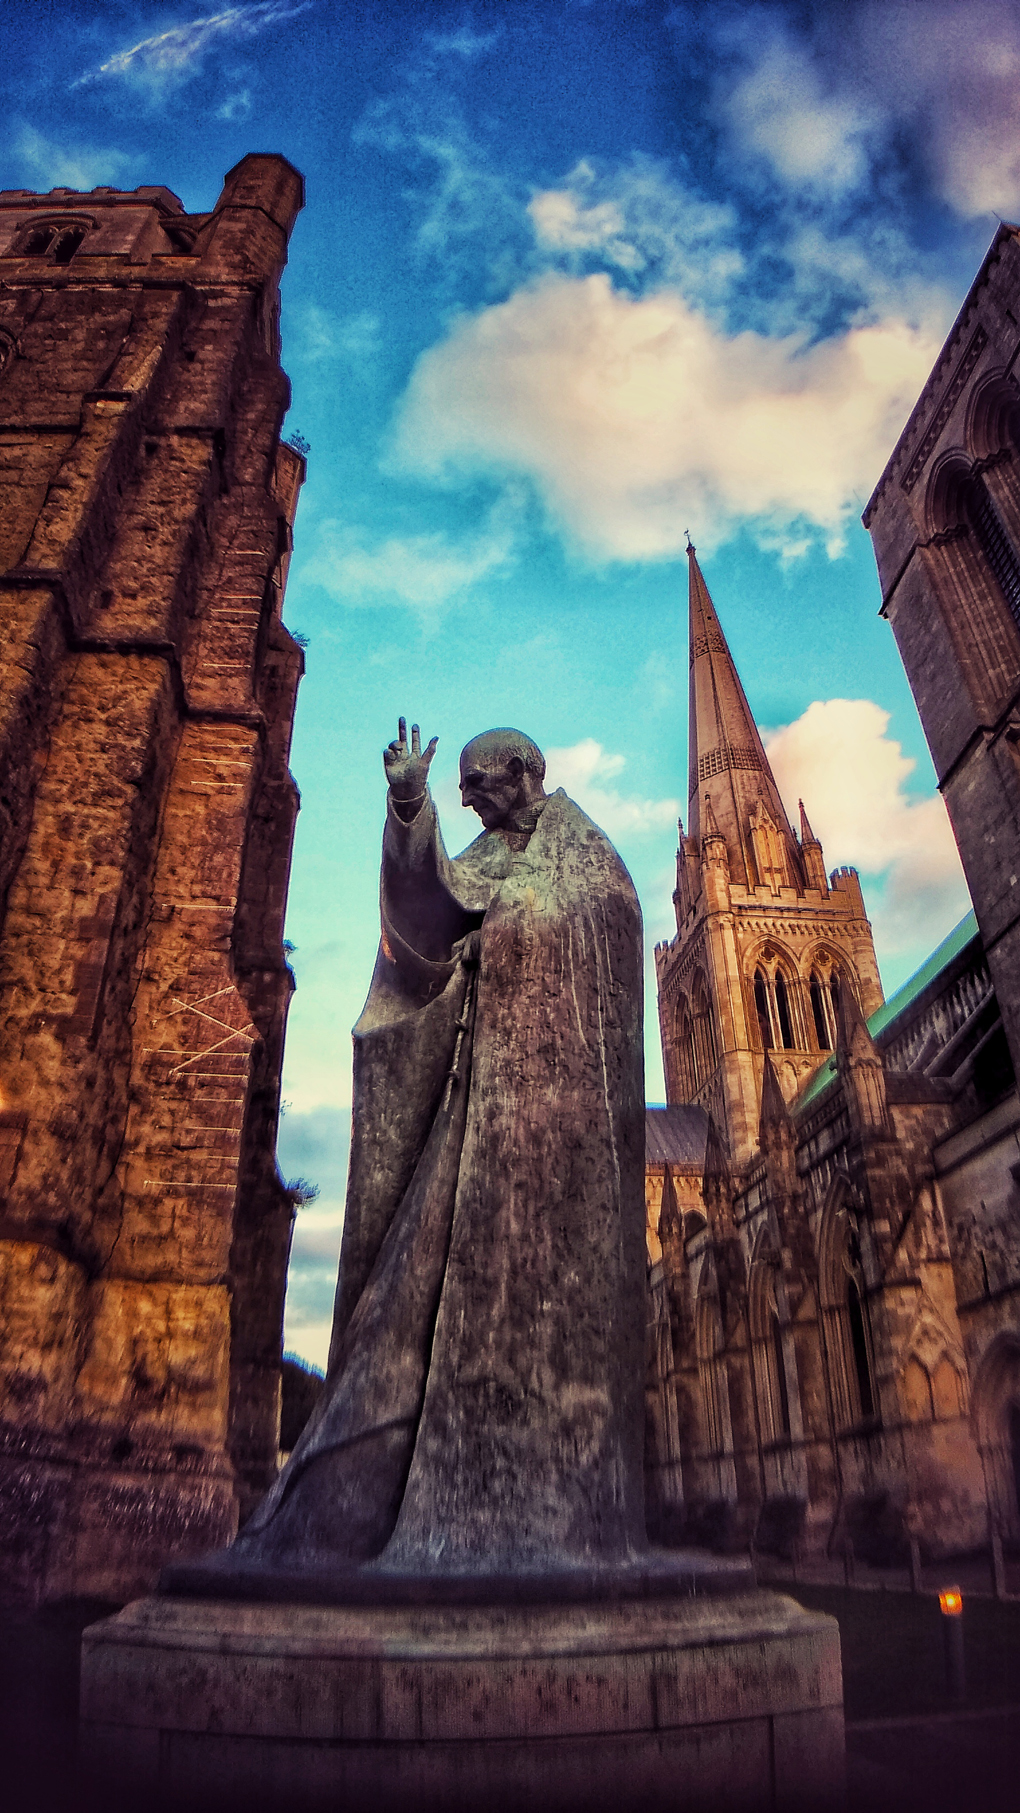 St Richard statue, Chichester cathedral